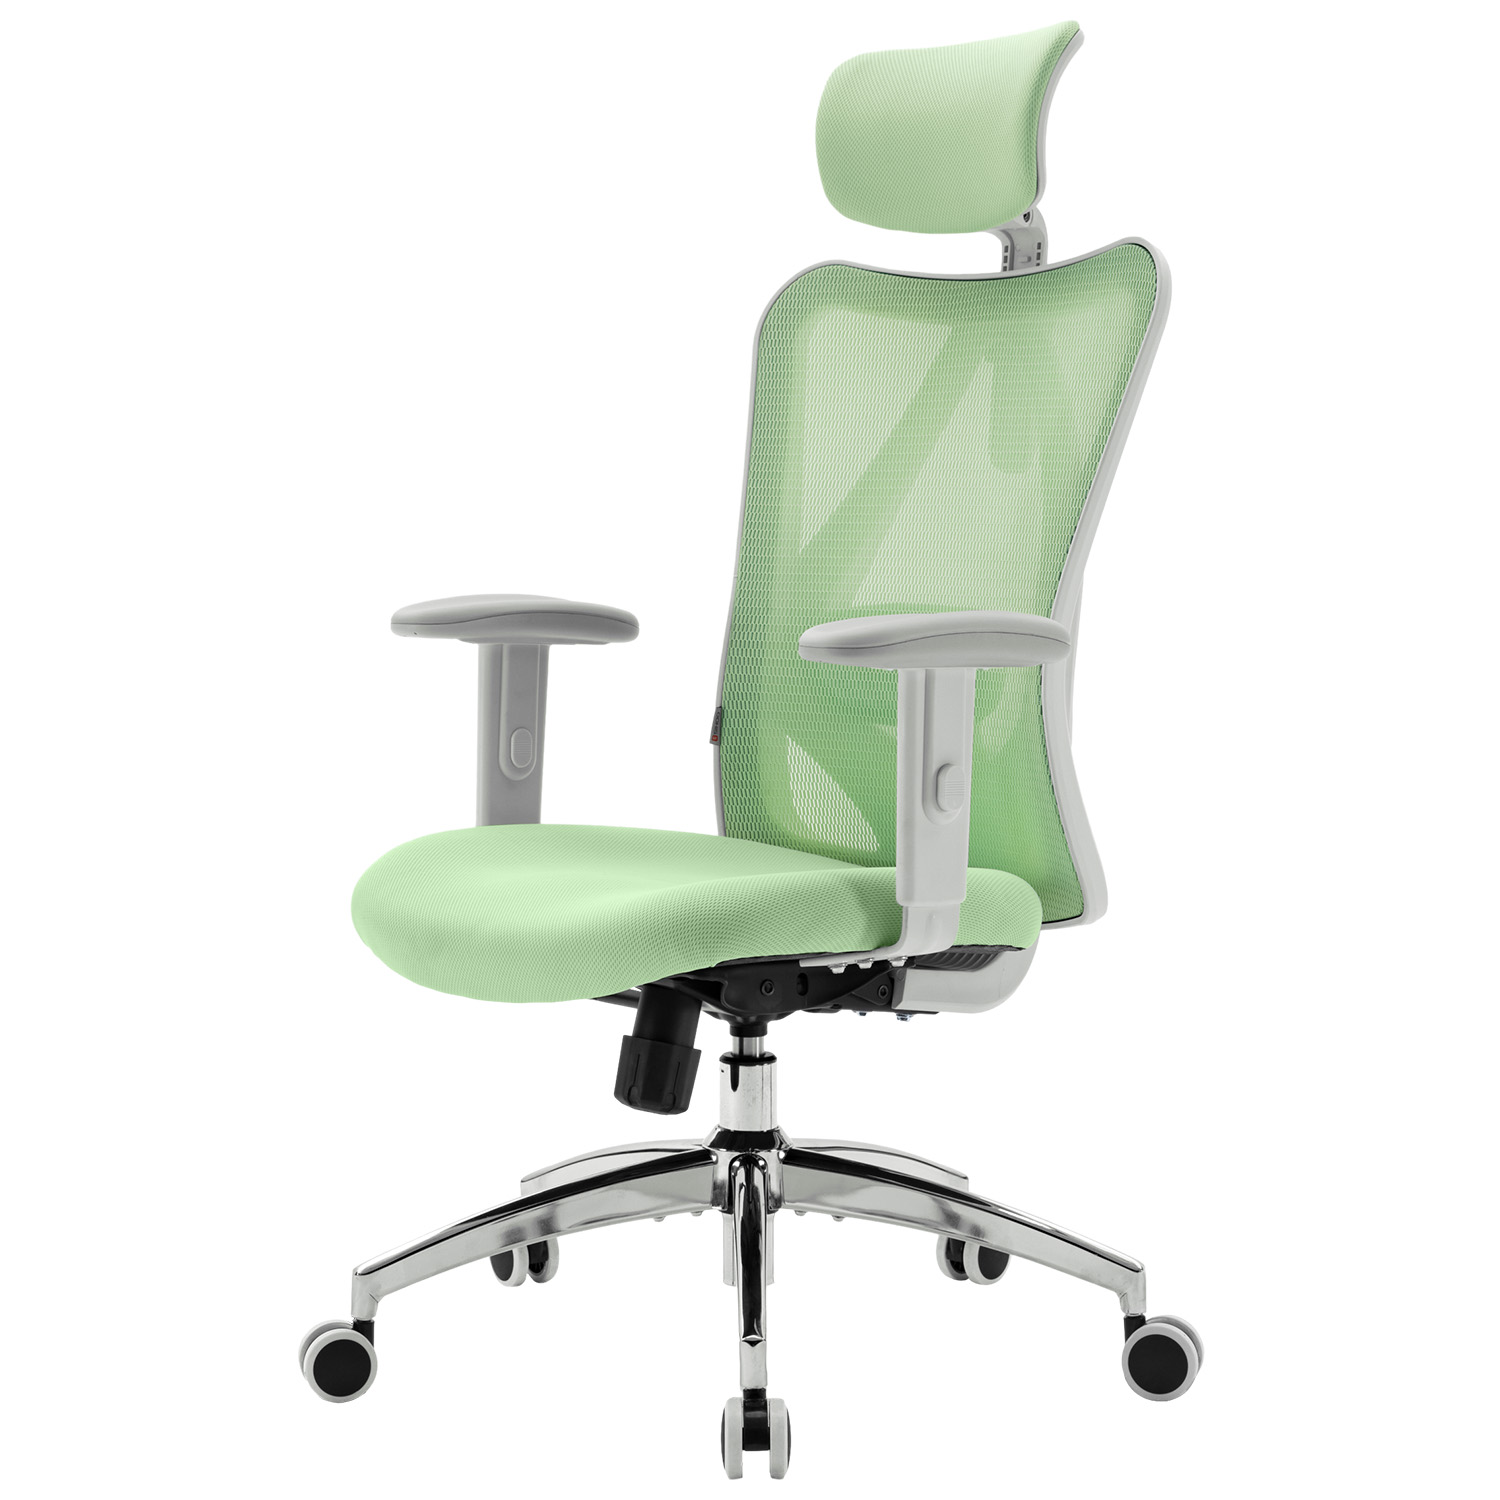 SIHOO Ergonomic Office Chair, Mesh Computer Desk Chair with Adjustable Lumbar Support, High Back chair for Big and Tall, White and Green - image 1 of 11